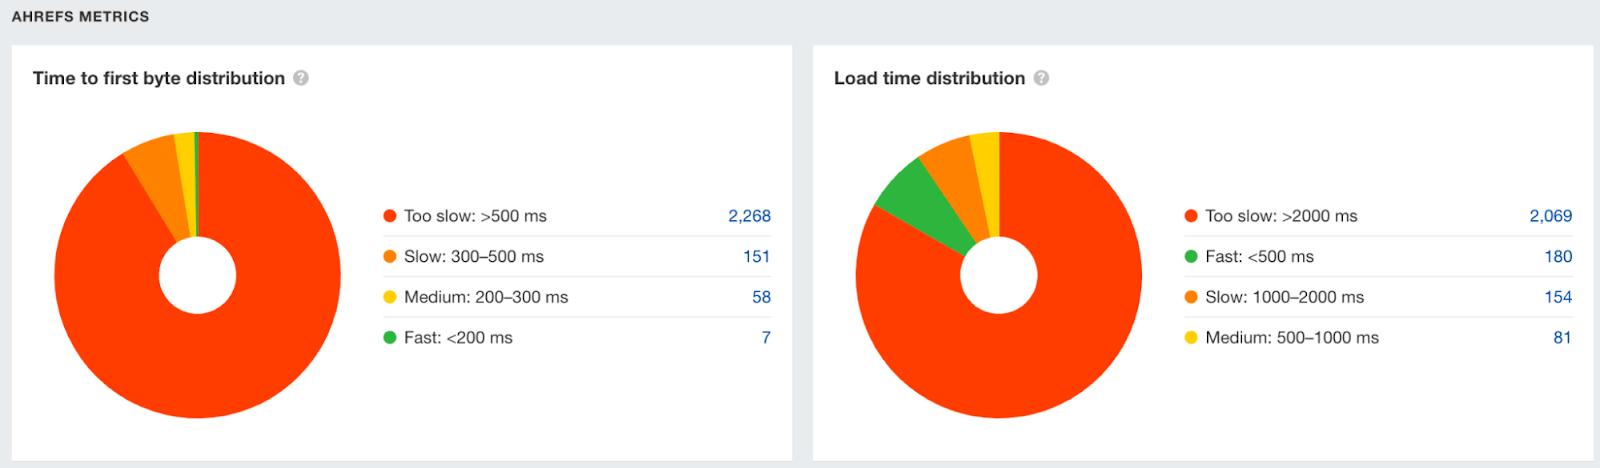 Pie charts showing data on TTFB and load time distribution, respectively 